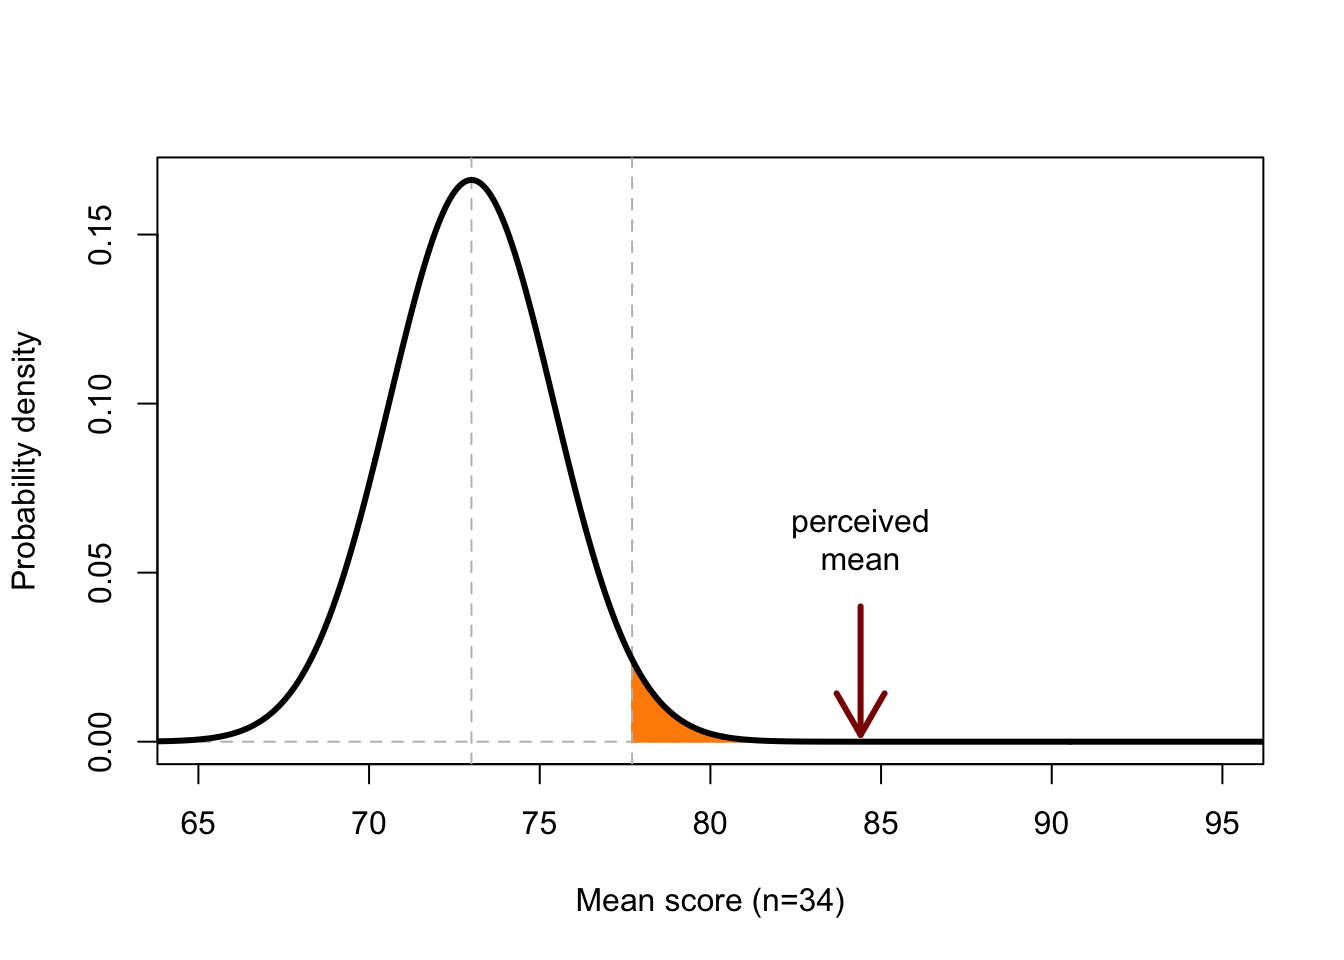 Probability distribution of the mean score from a sample (n=34) with a population mean 73 and population s.d. 14. The coloured area covers 5% of the total area under the curve; outcomes along the X-axis of this area thus have a probability of at most 5% of occurring if H0 is true.